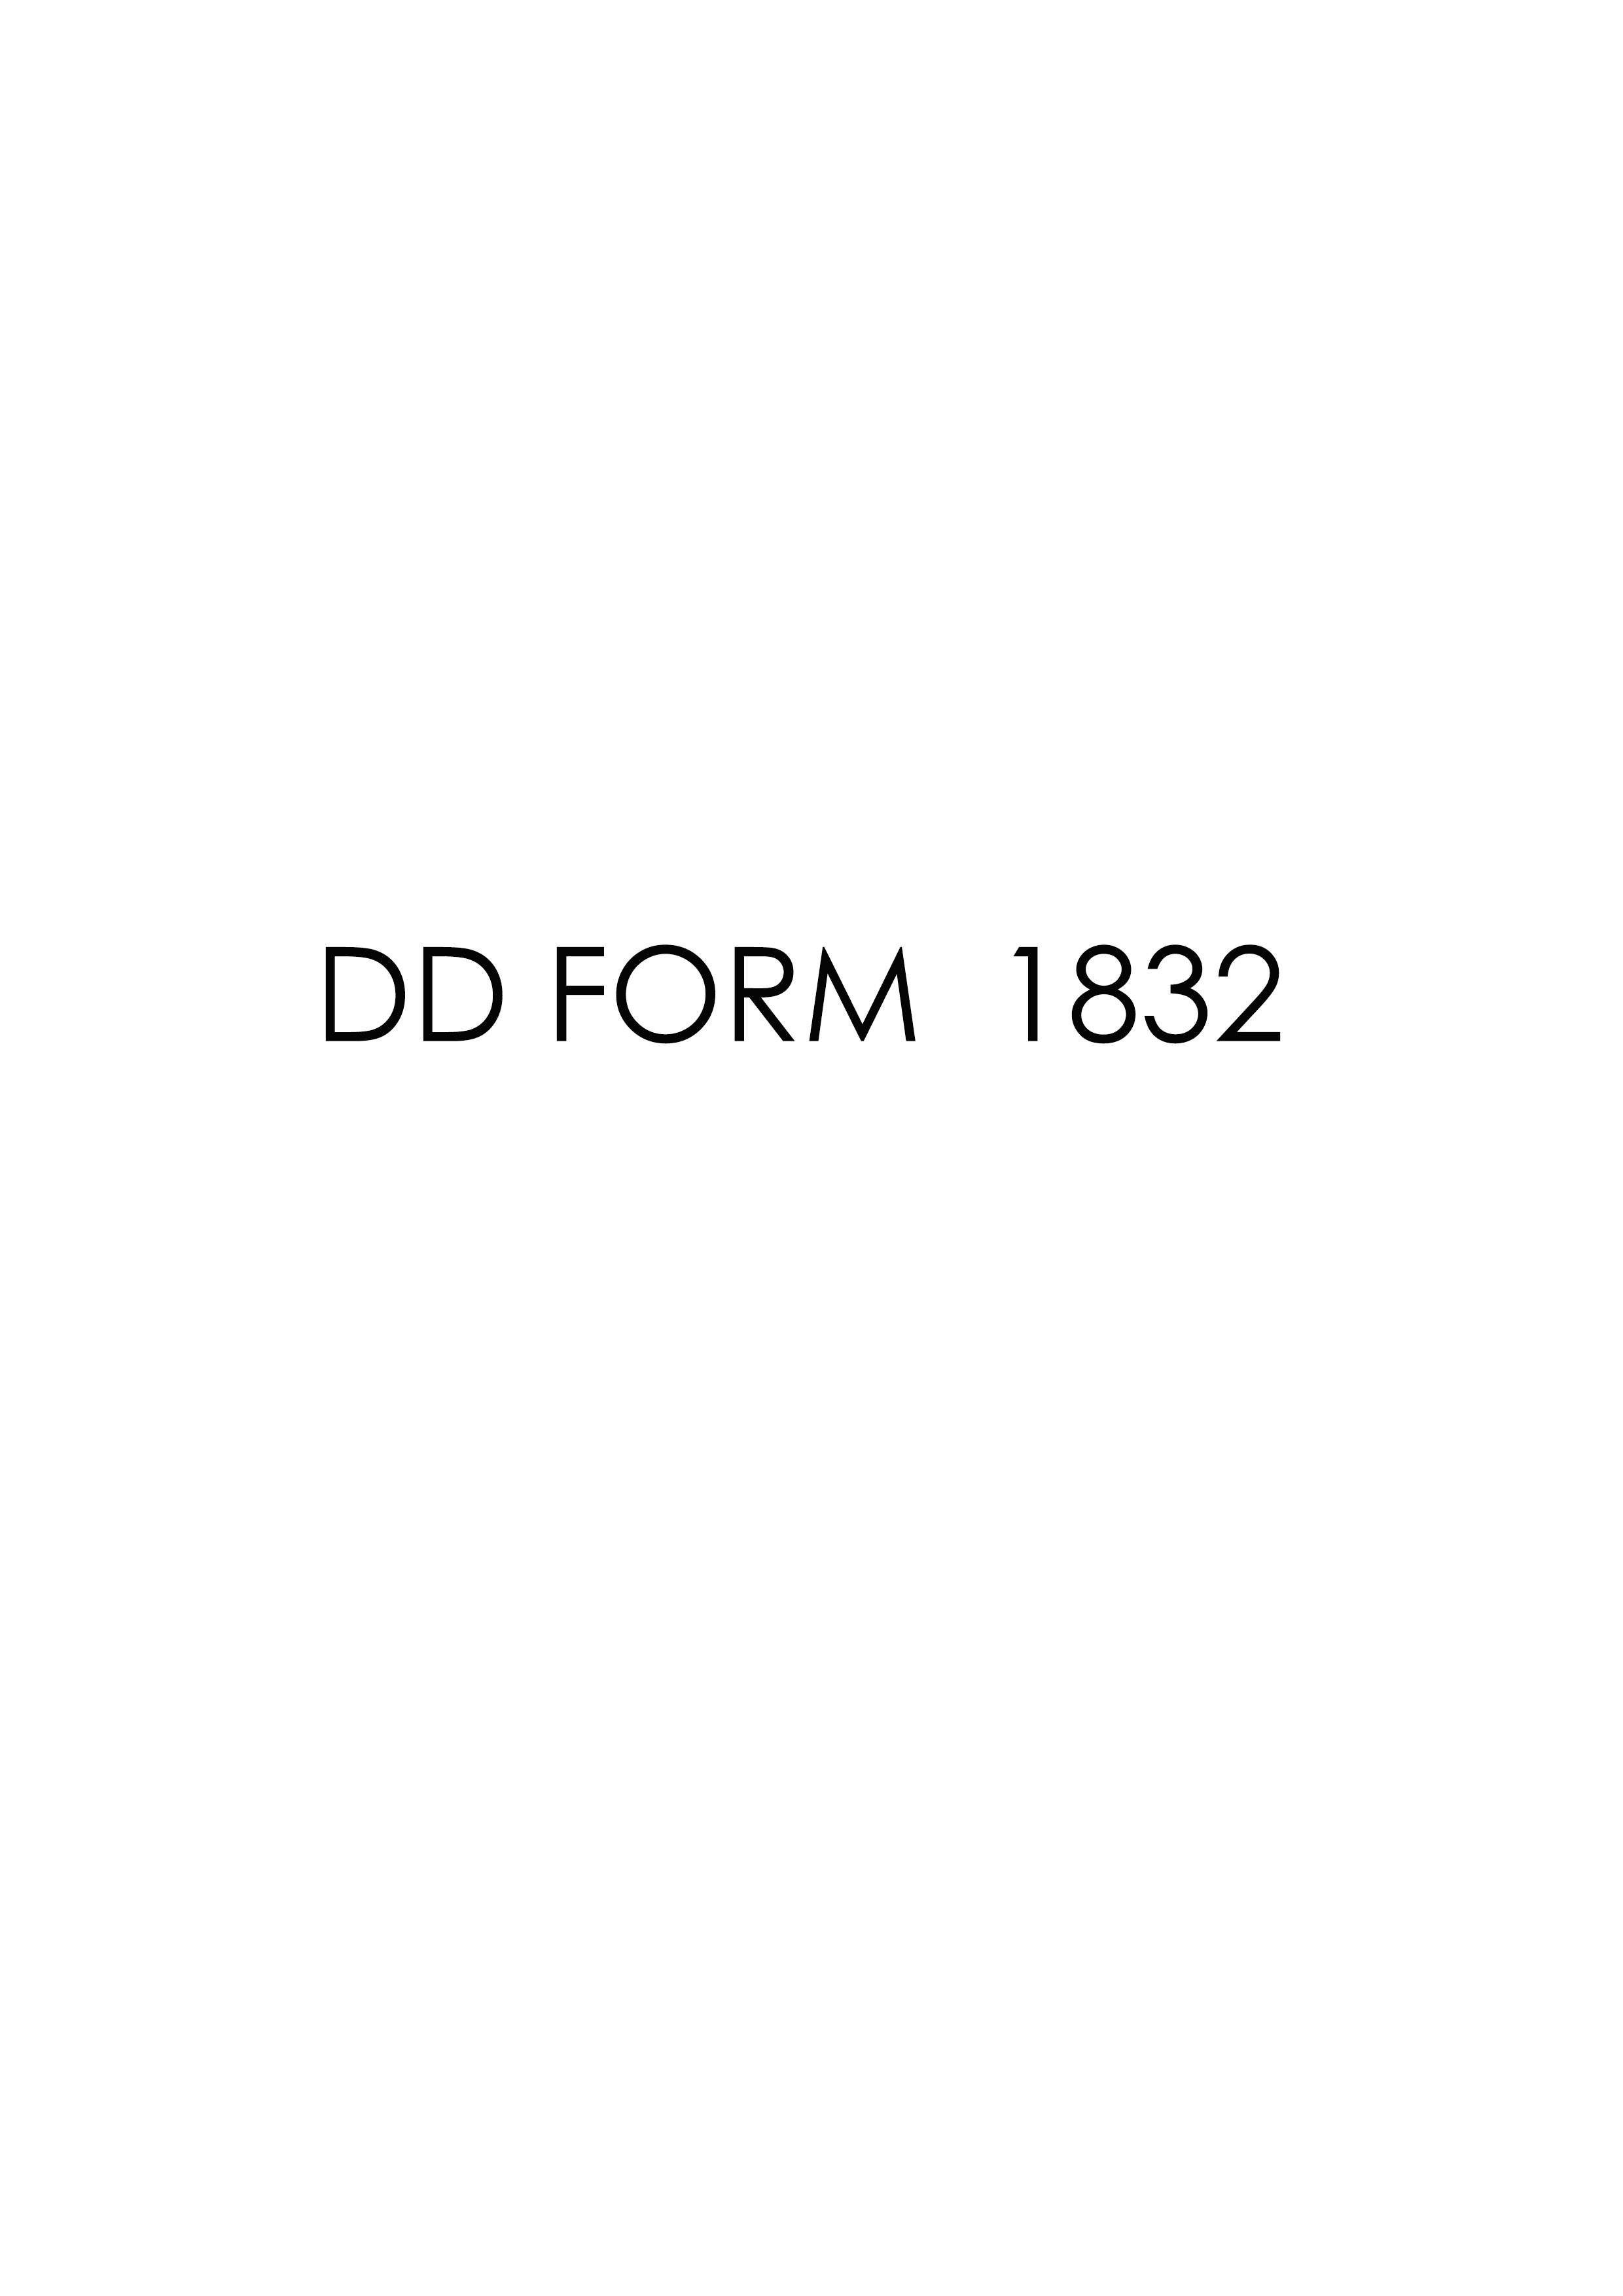 Download Fillable dd Form 1832